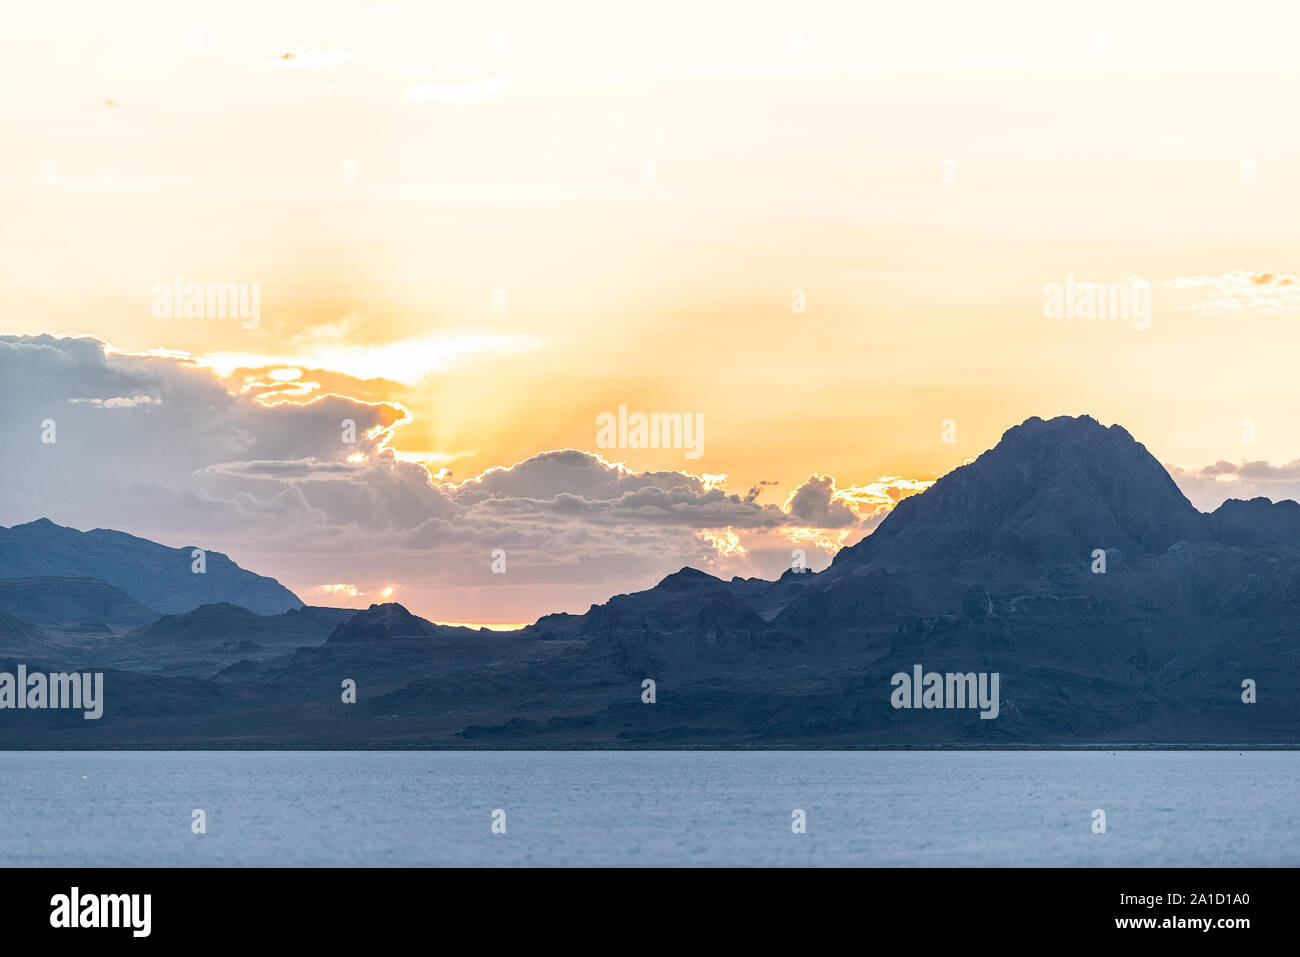 Bonneville Salt Flats landscape near Salt Lake City, Utah and silhouette mountain view and sunset behind clouds Stock Photo